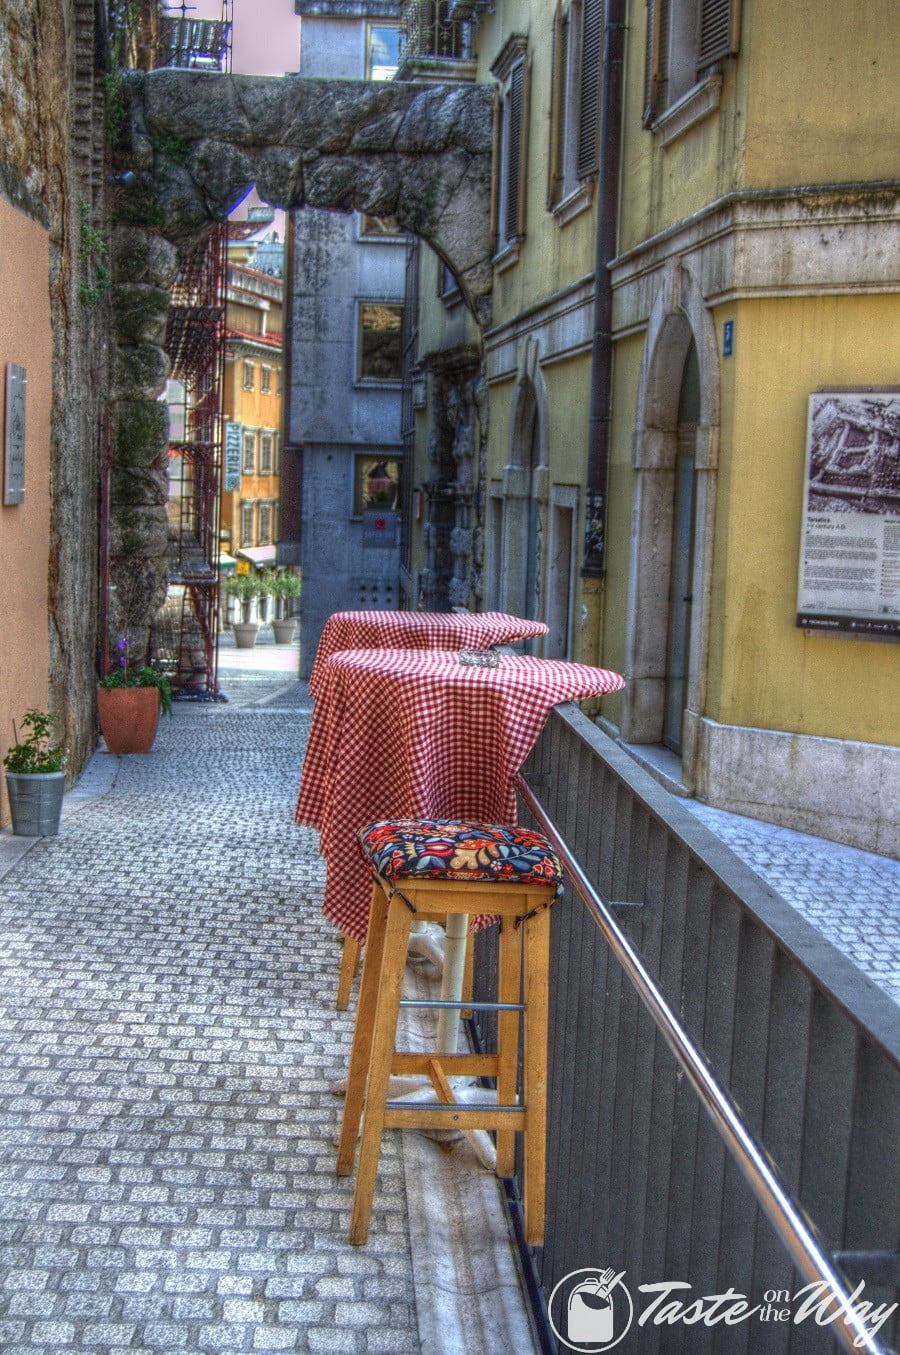 Check out these stunning pictures of cafes in Rijeka, #Croatia #photography #hdr #travel @tasteontheway